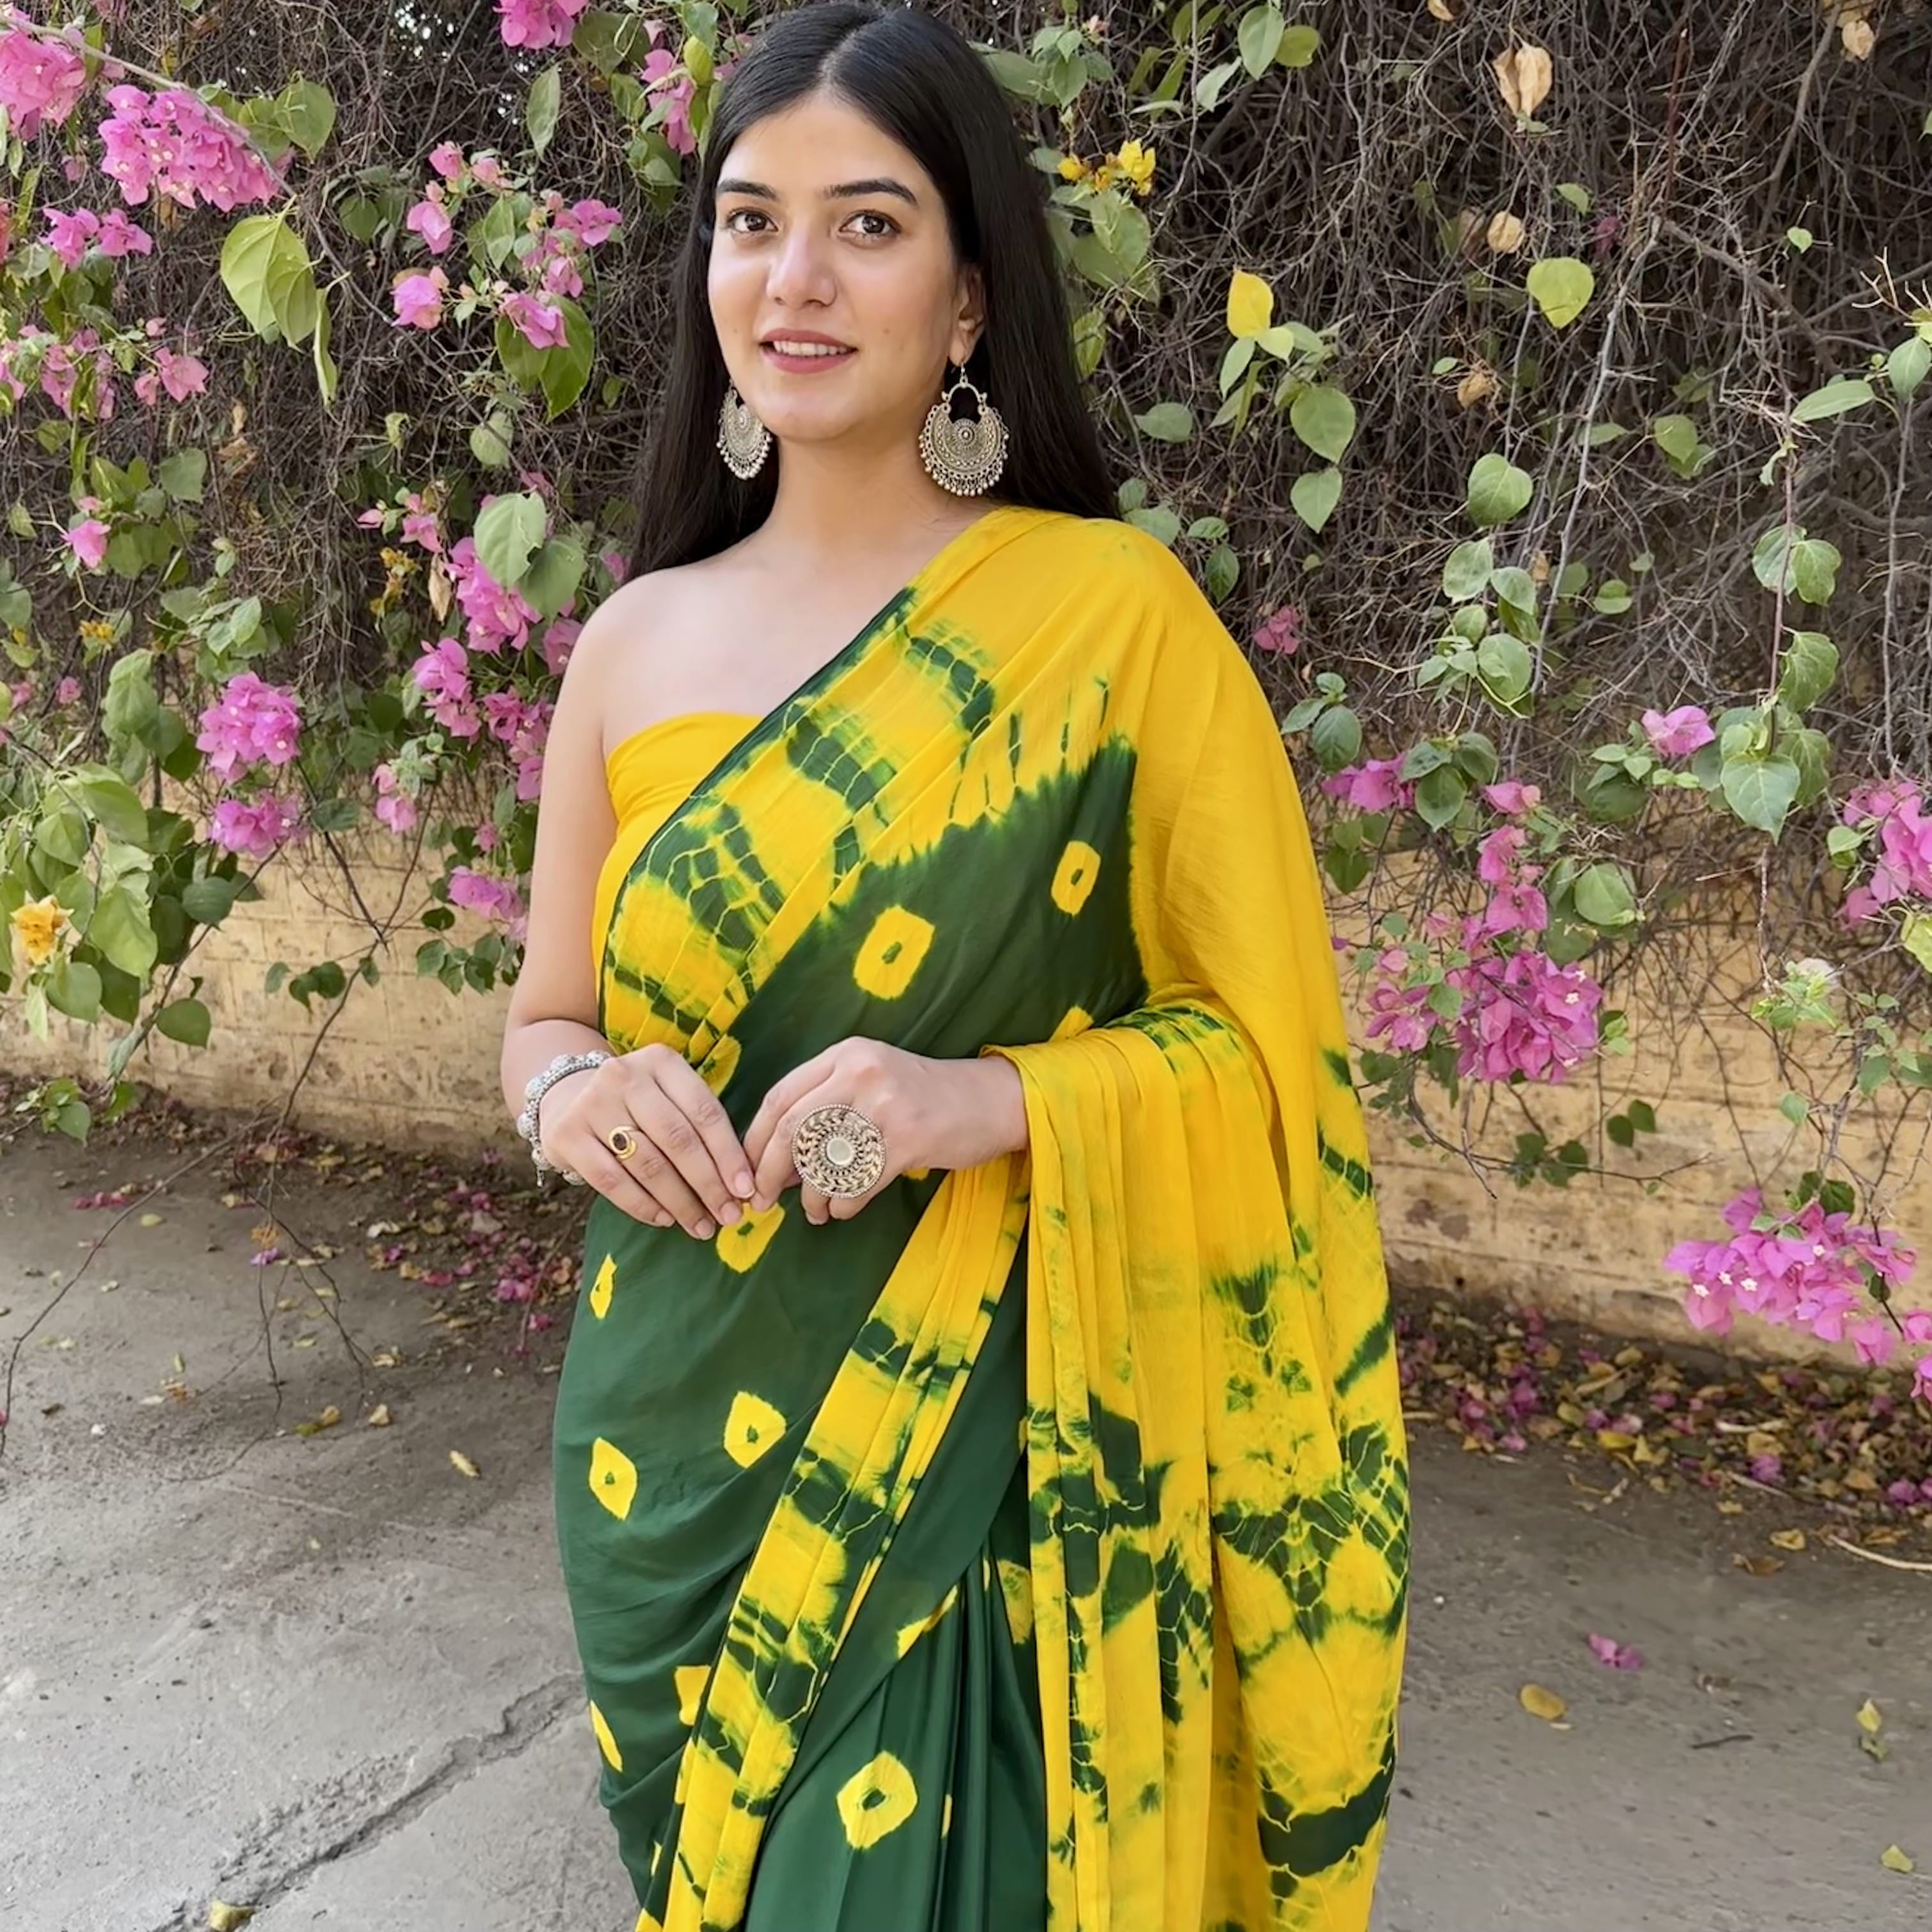 green bandhej shibori tie dye chinnon saree handmade in india light-weight for summer wear party wear office wear Indian outfit